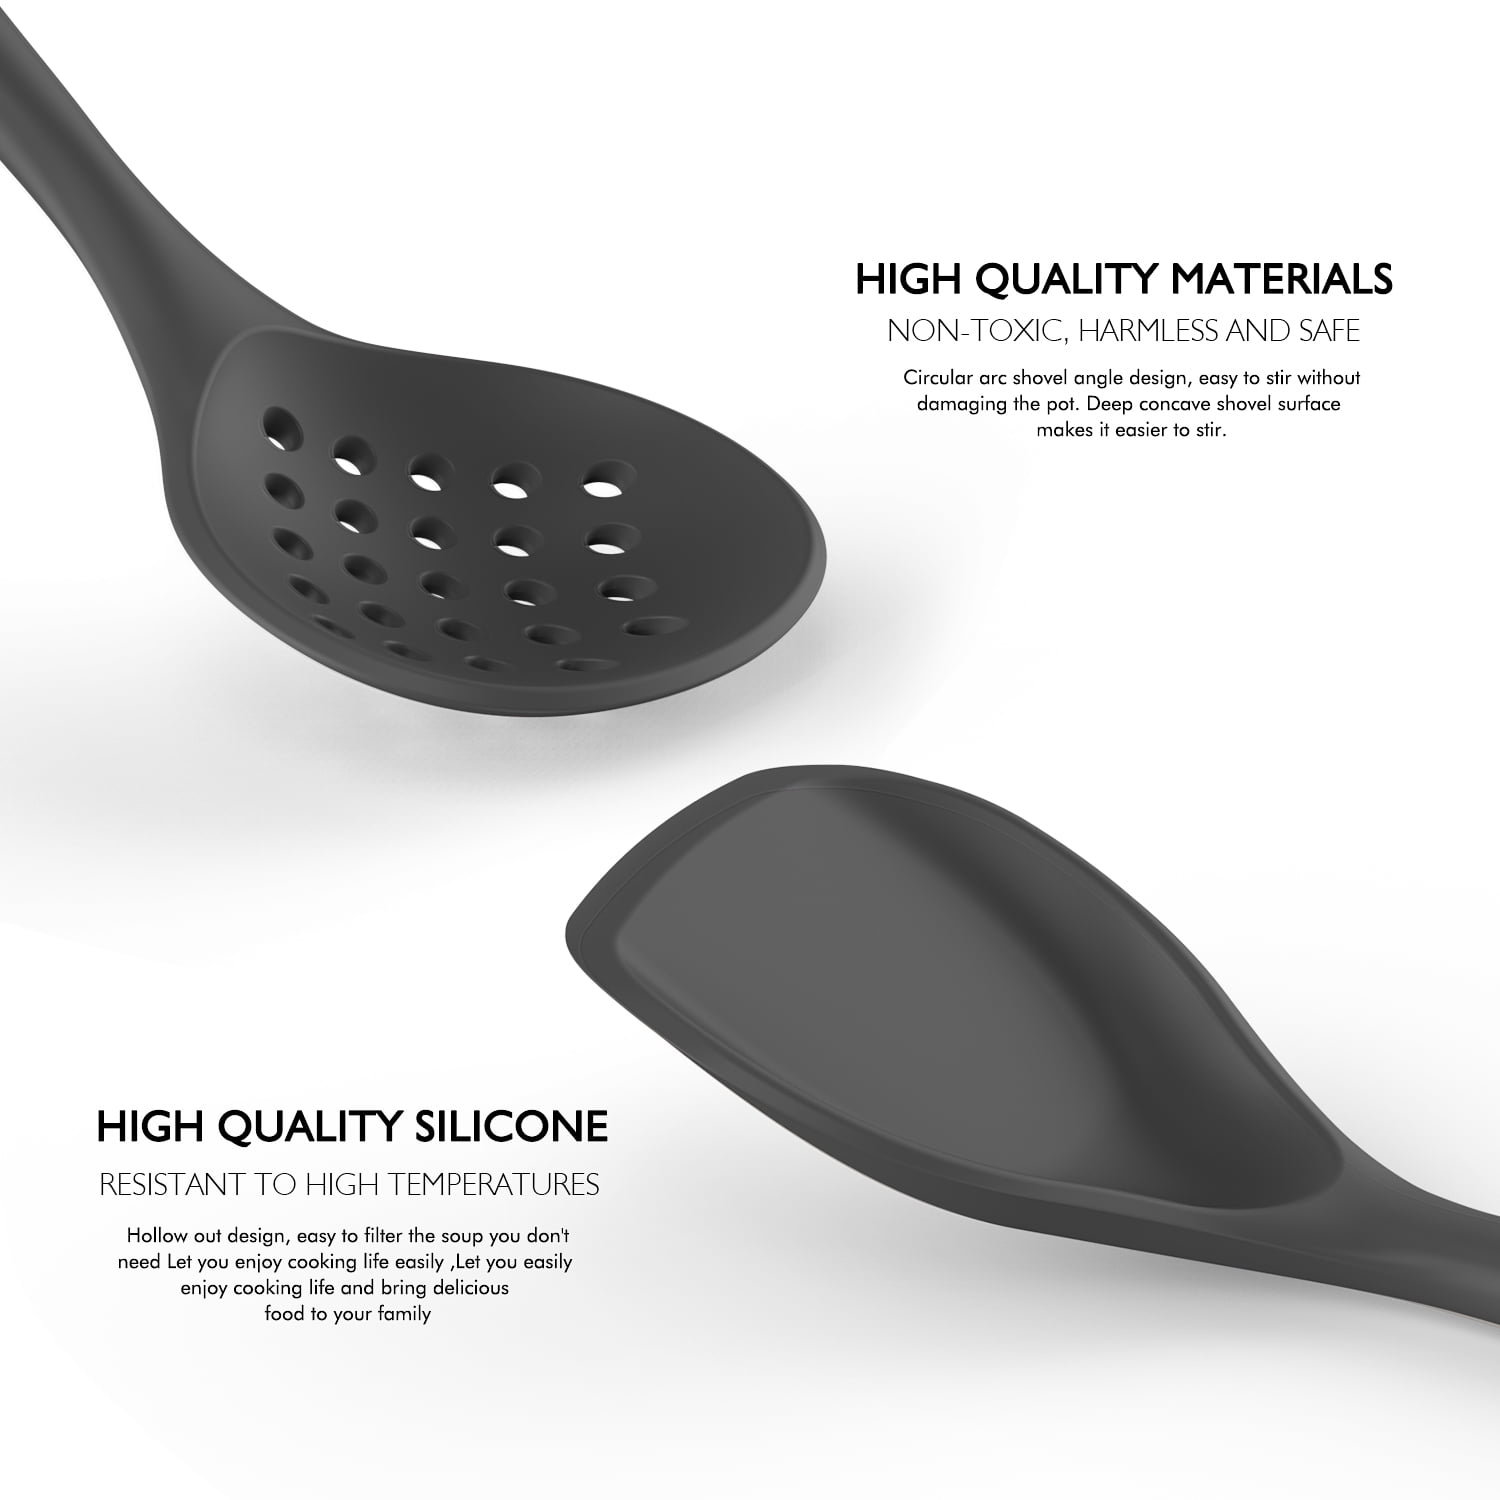 7-Piece Silicone and Bamboo Kitchen Utensils Set with Holder for Cooking,  Virtually Non-Stick, with Ladle, Slotted Turner, Slotted Spoon, Serving  Spoon, Pasta Server, Spatula, Scratch-Resistant